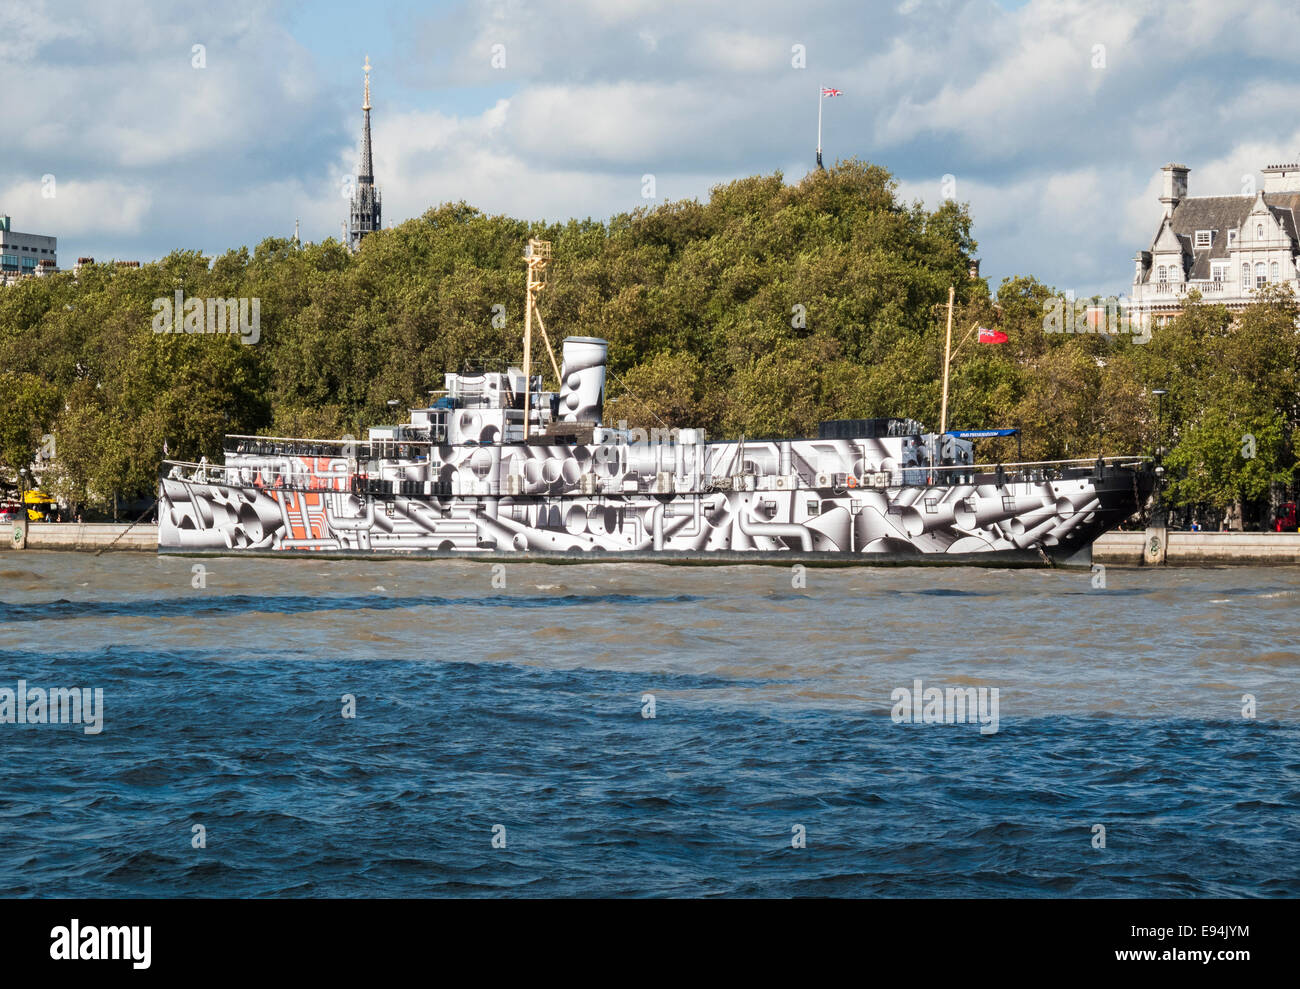 HMS President (HQMS President (1918)), moored on the River Thames, Victoria Embankment, London, one of three surviving WW1 warships, painted in a dazzle design Stock Photo